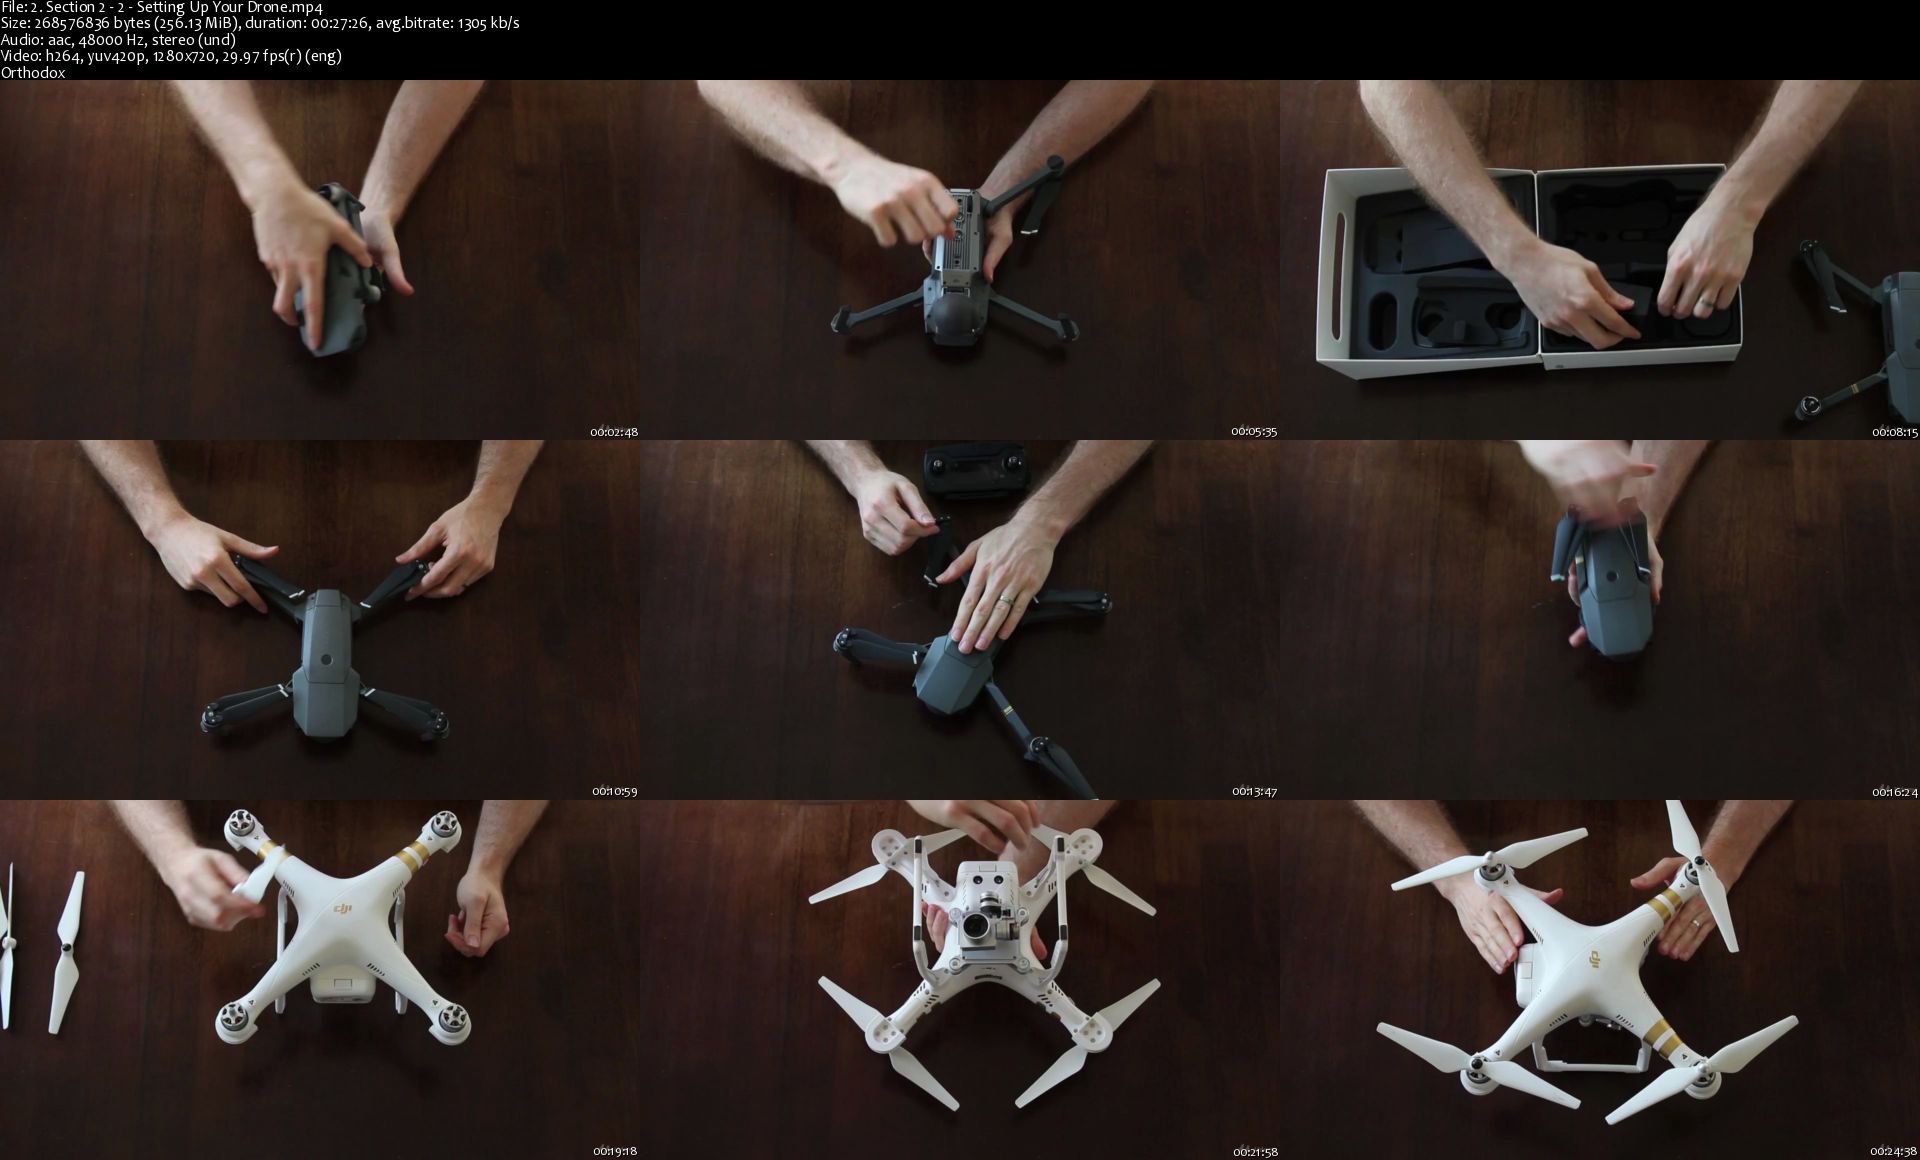 2-Section-2-2-Setting-Up-Your-Drone-s.jpg